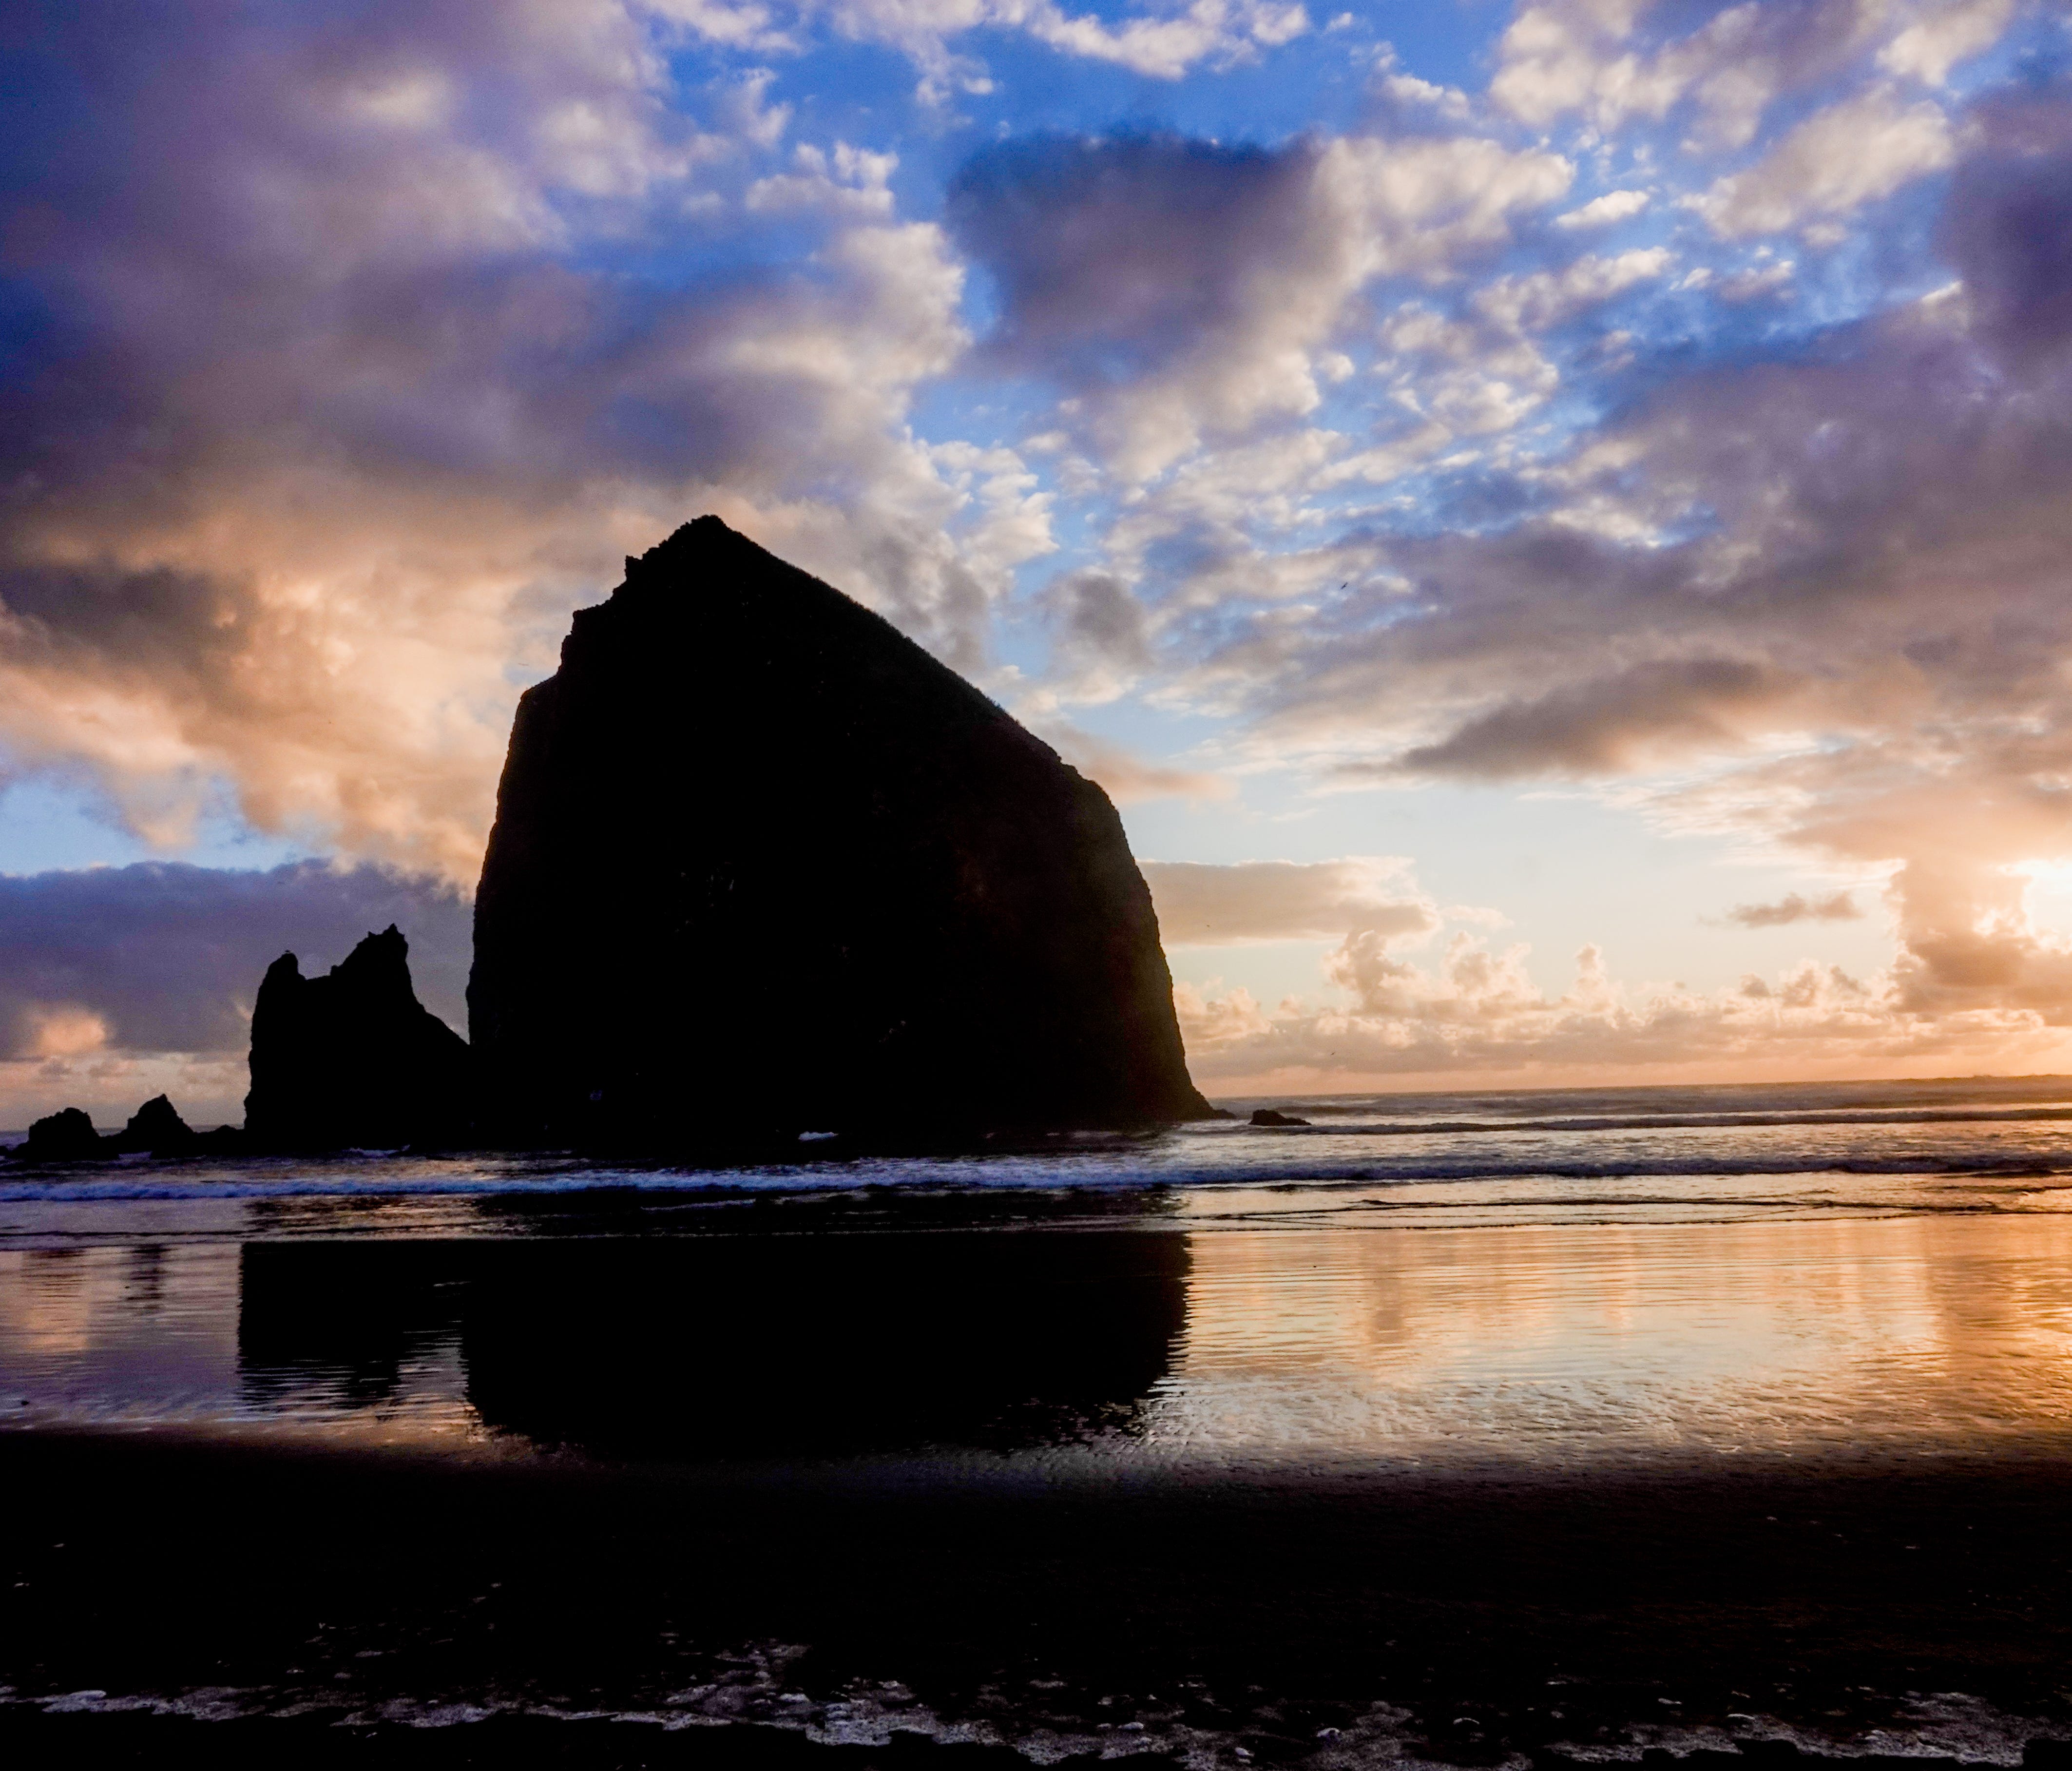 Sunset in Cannon Beach. Photo geek note: this is an HDR photo, three photos merged into one, a combination of under-exposed, over-exposed and one normal exposure